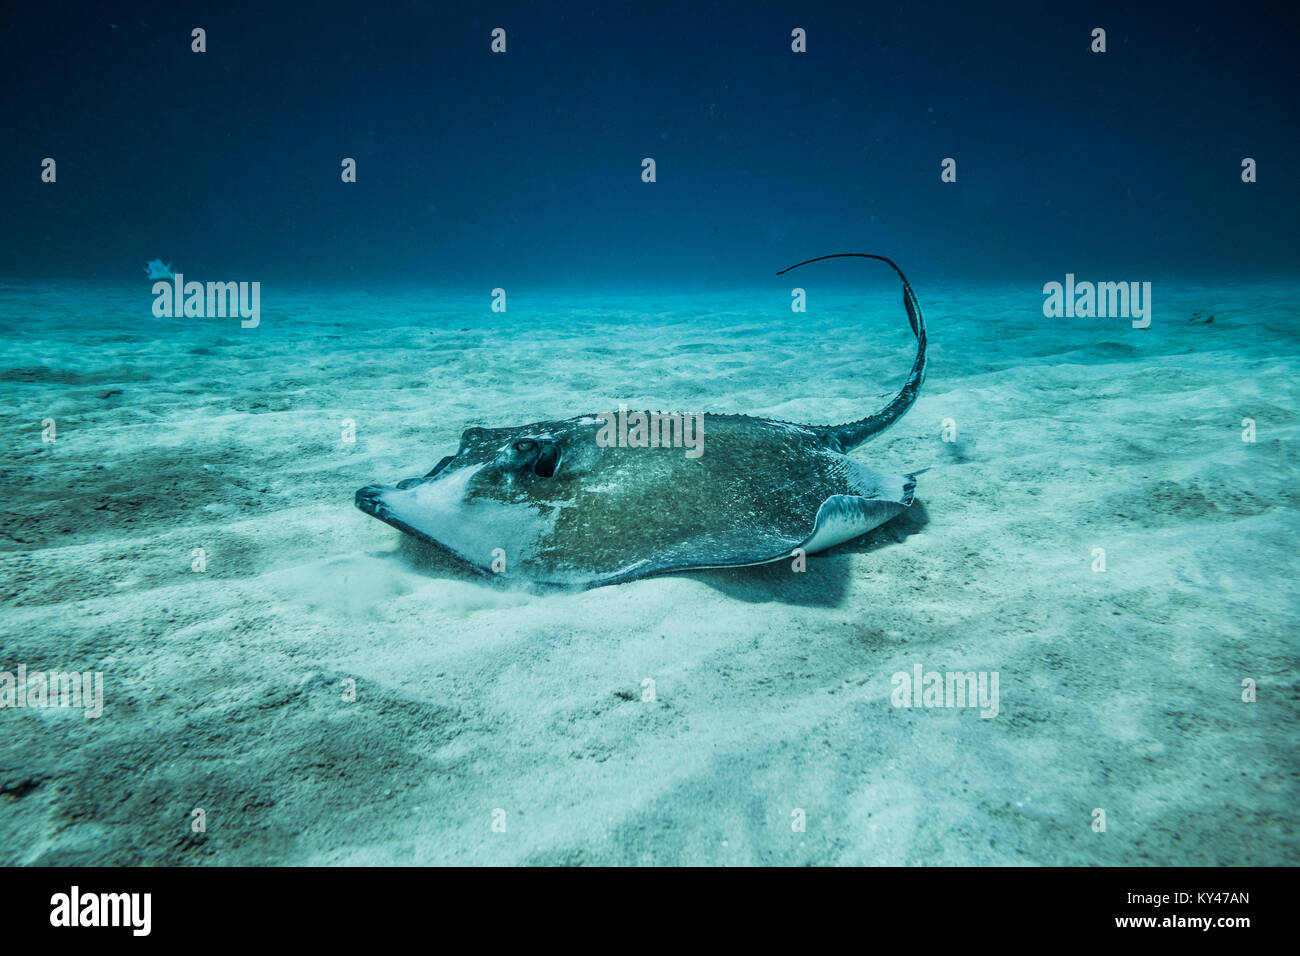 Common Stingray swimming on the ground of the ocean. Stock Photo